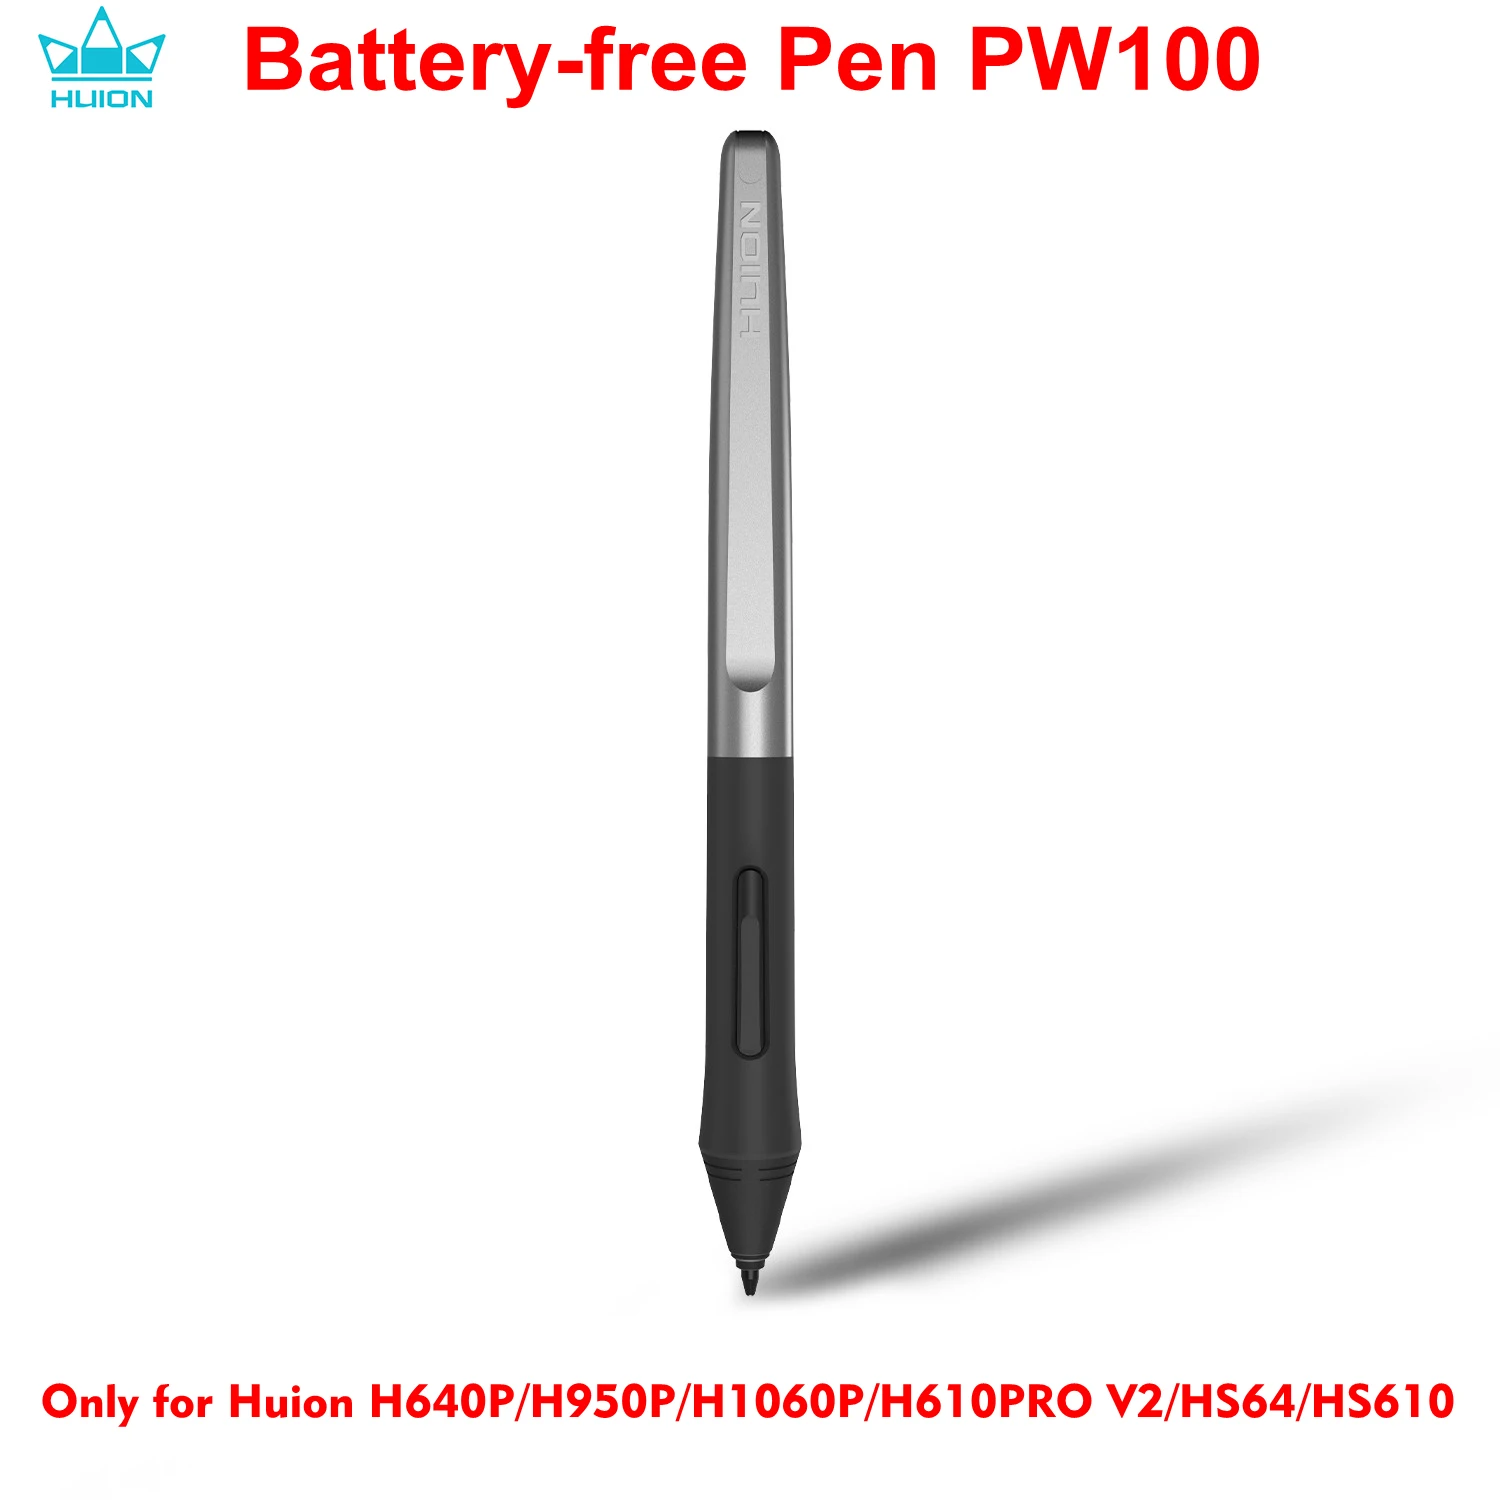 

HUION Battery-free Stylus Pen PW100 for HUION H640P/ H950P/ H1060P/ H610PRO V2/ HS64/ HS610 Digital Graphic Drawing Tablets